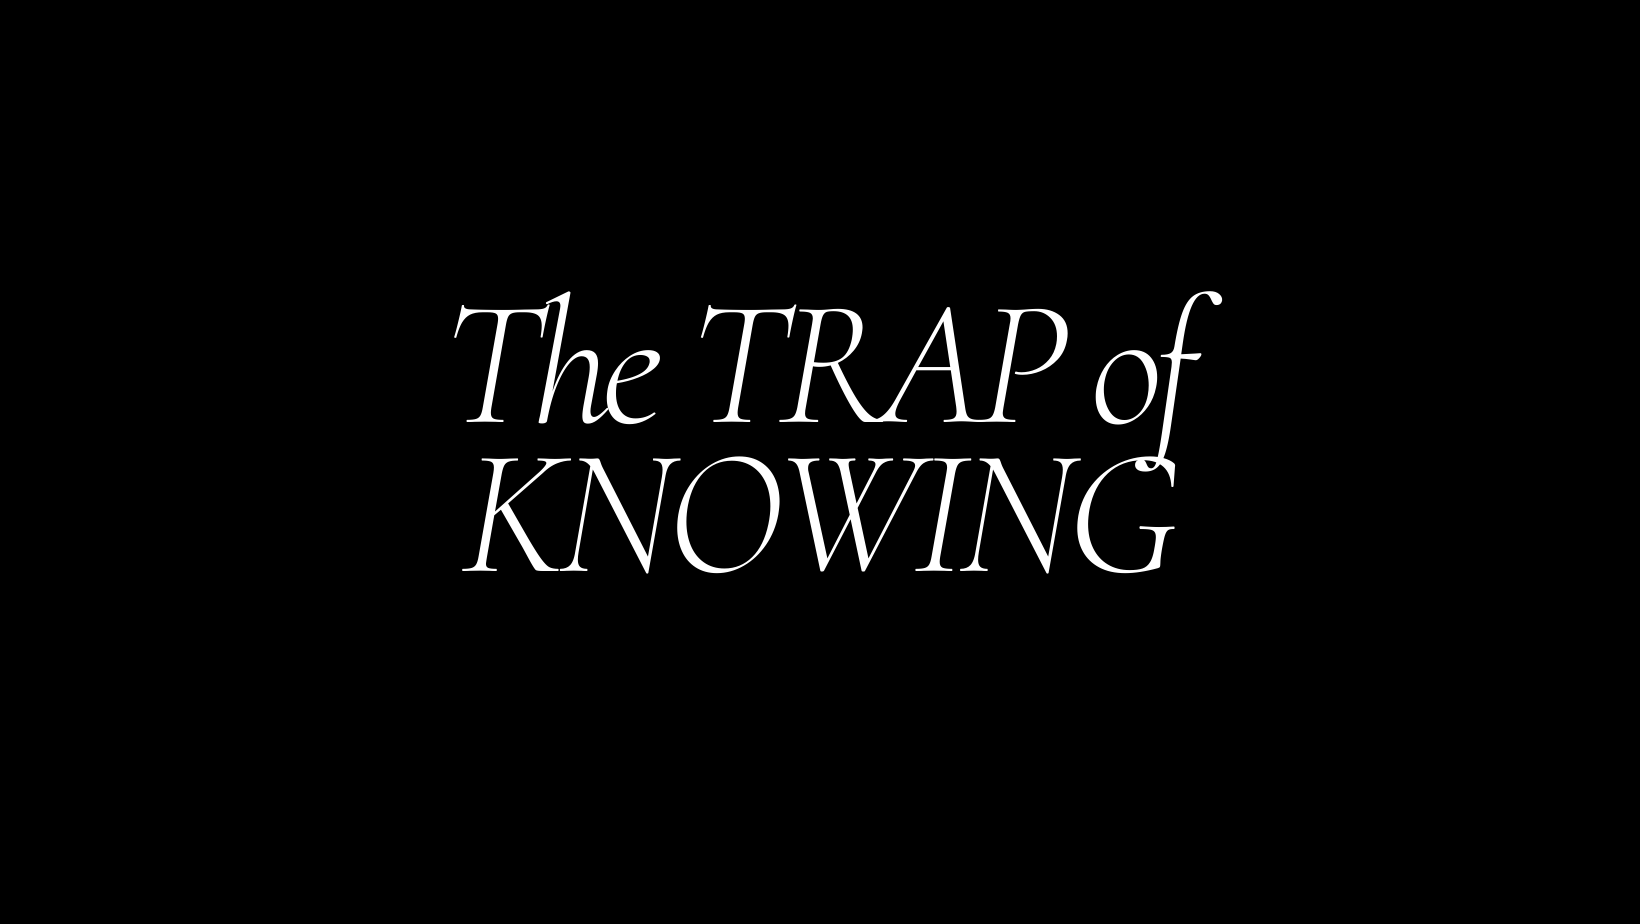 The Trap of Knowing